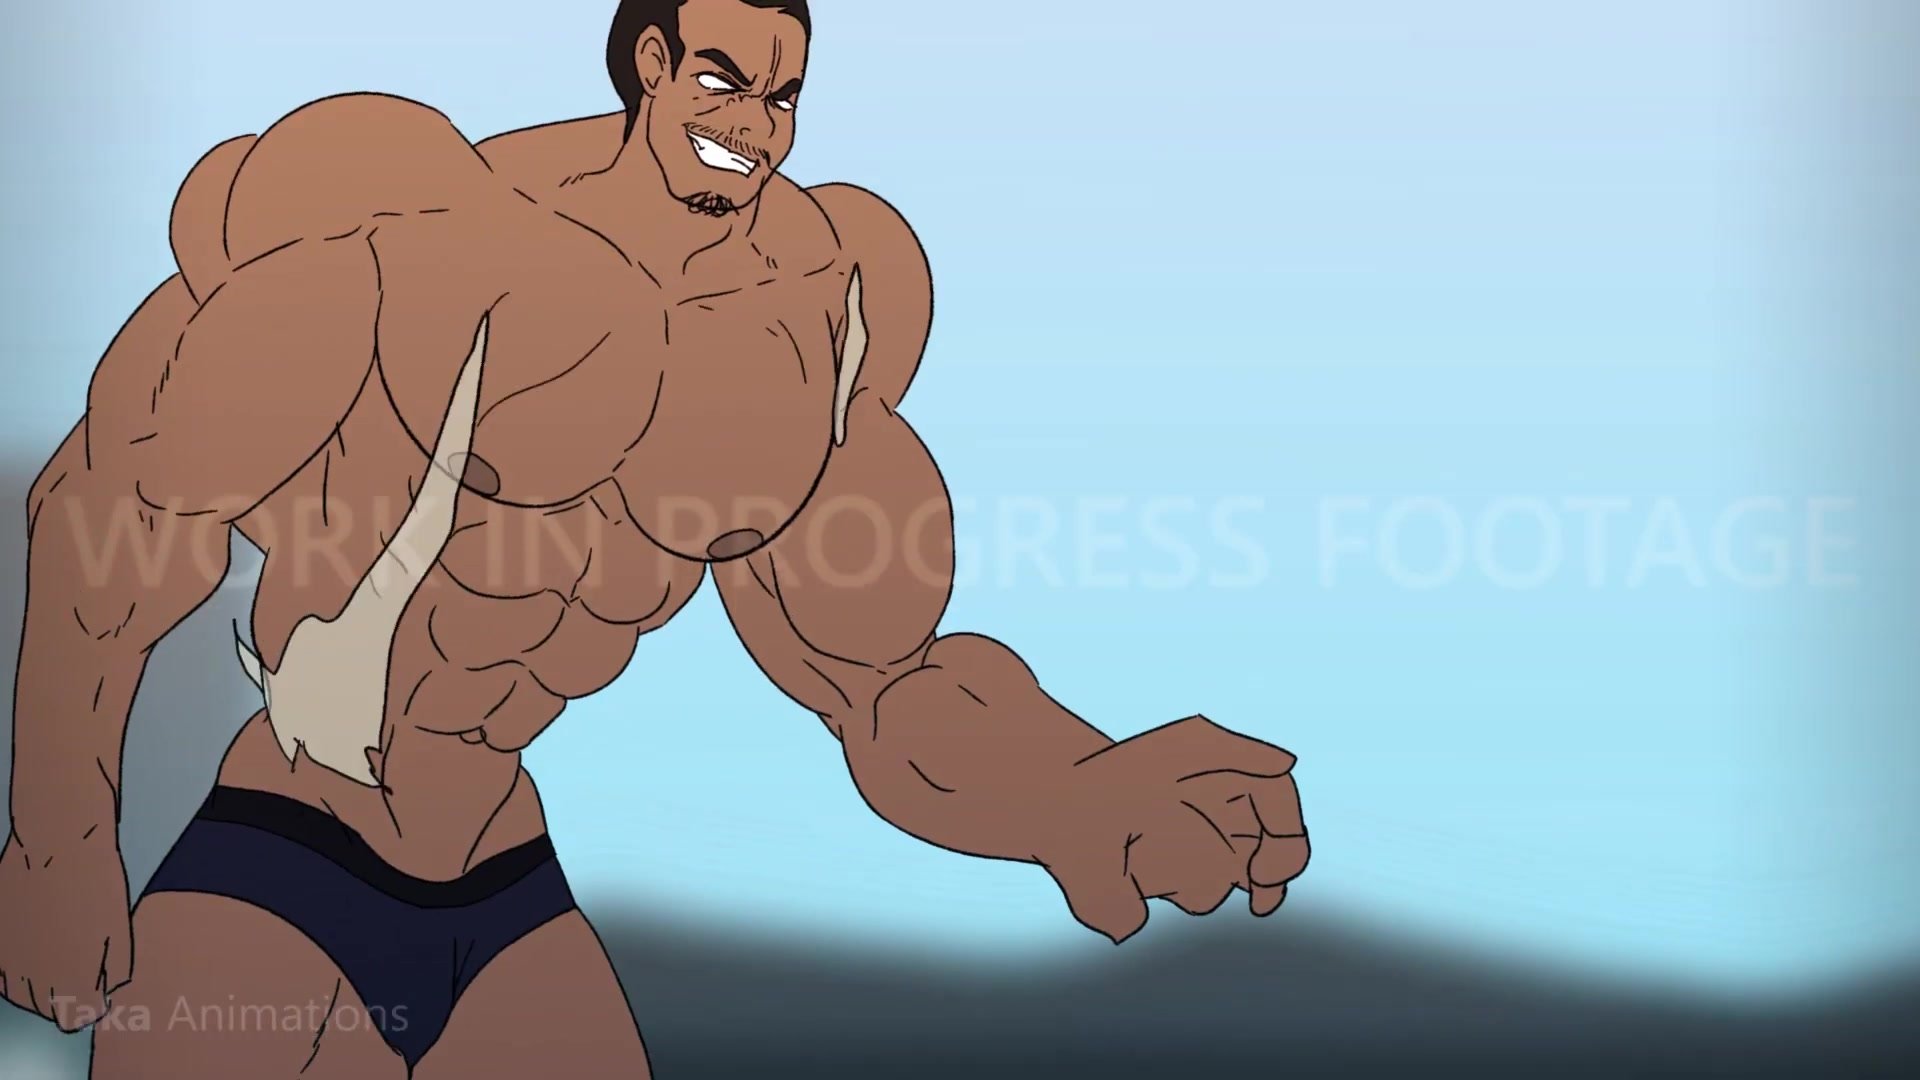 Muscle growth animation porn